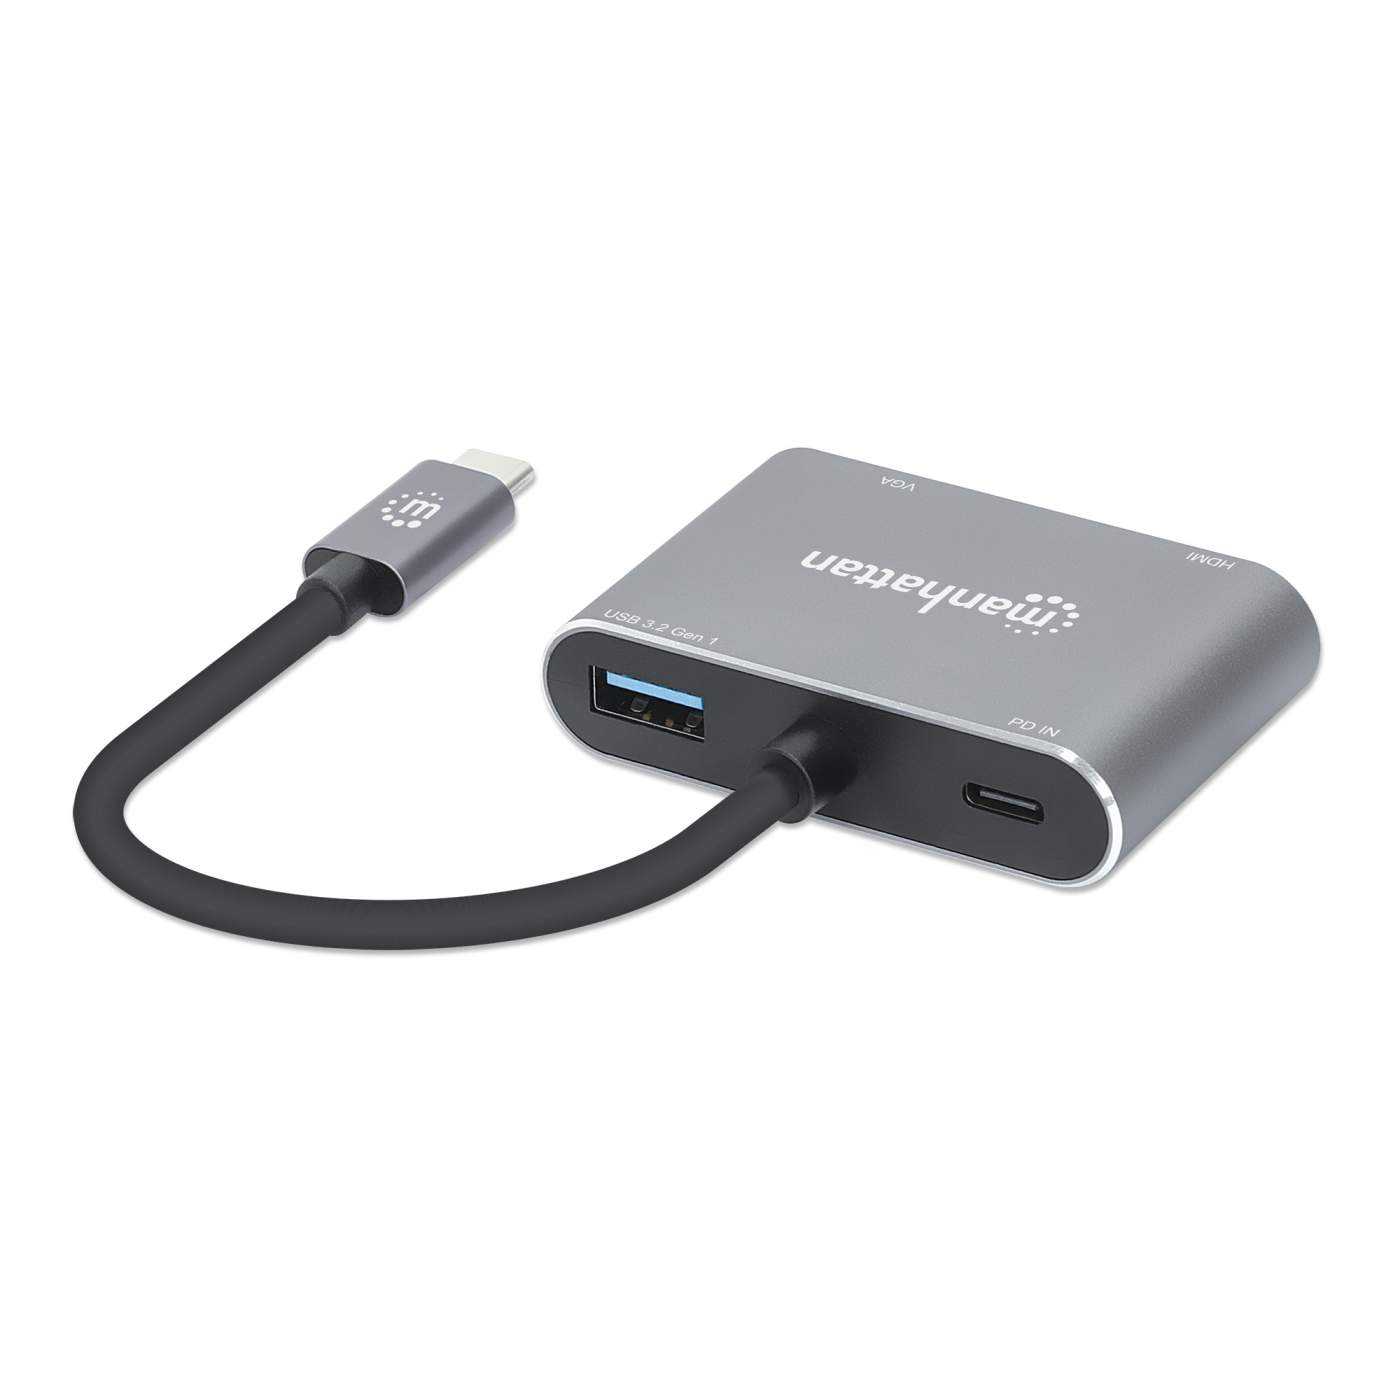 USB-C to HDMI & VGA 4-in-1 Docking Converter w/ Power Delivery